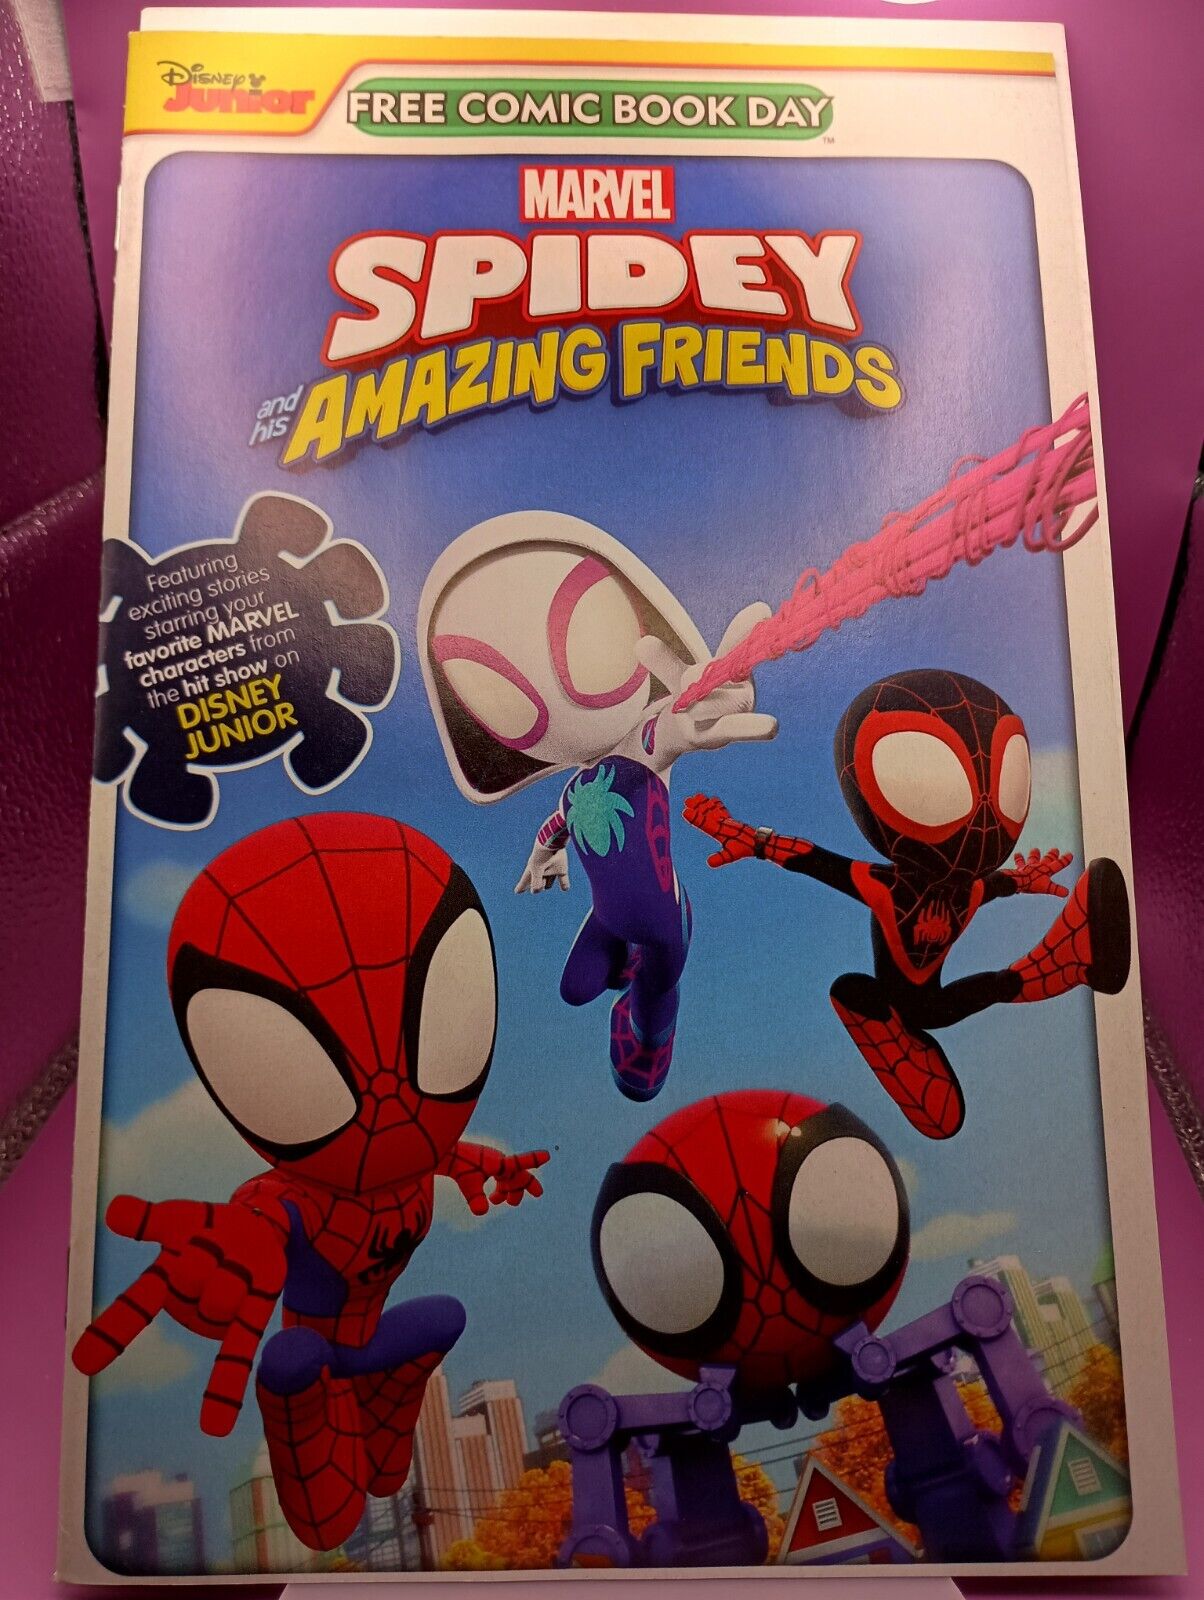 UNSTAMPED 2023 FCBD Spidey Amazing Friends Promotional Giveaway Comic Book FR/SH